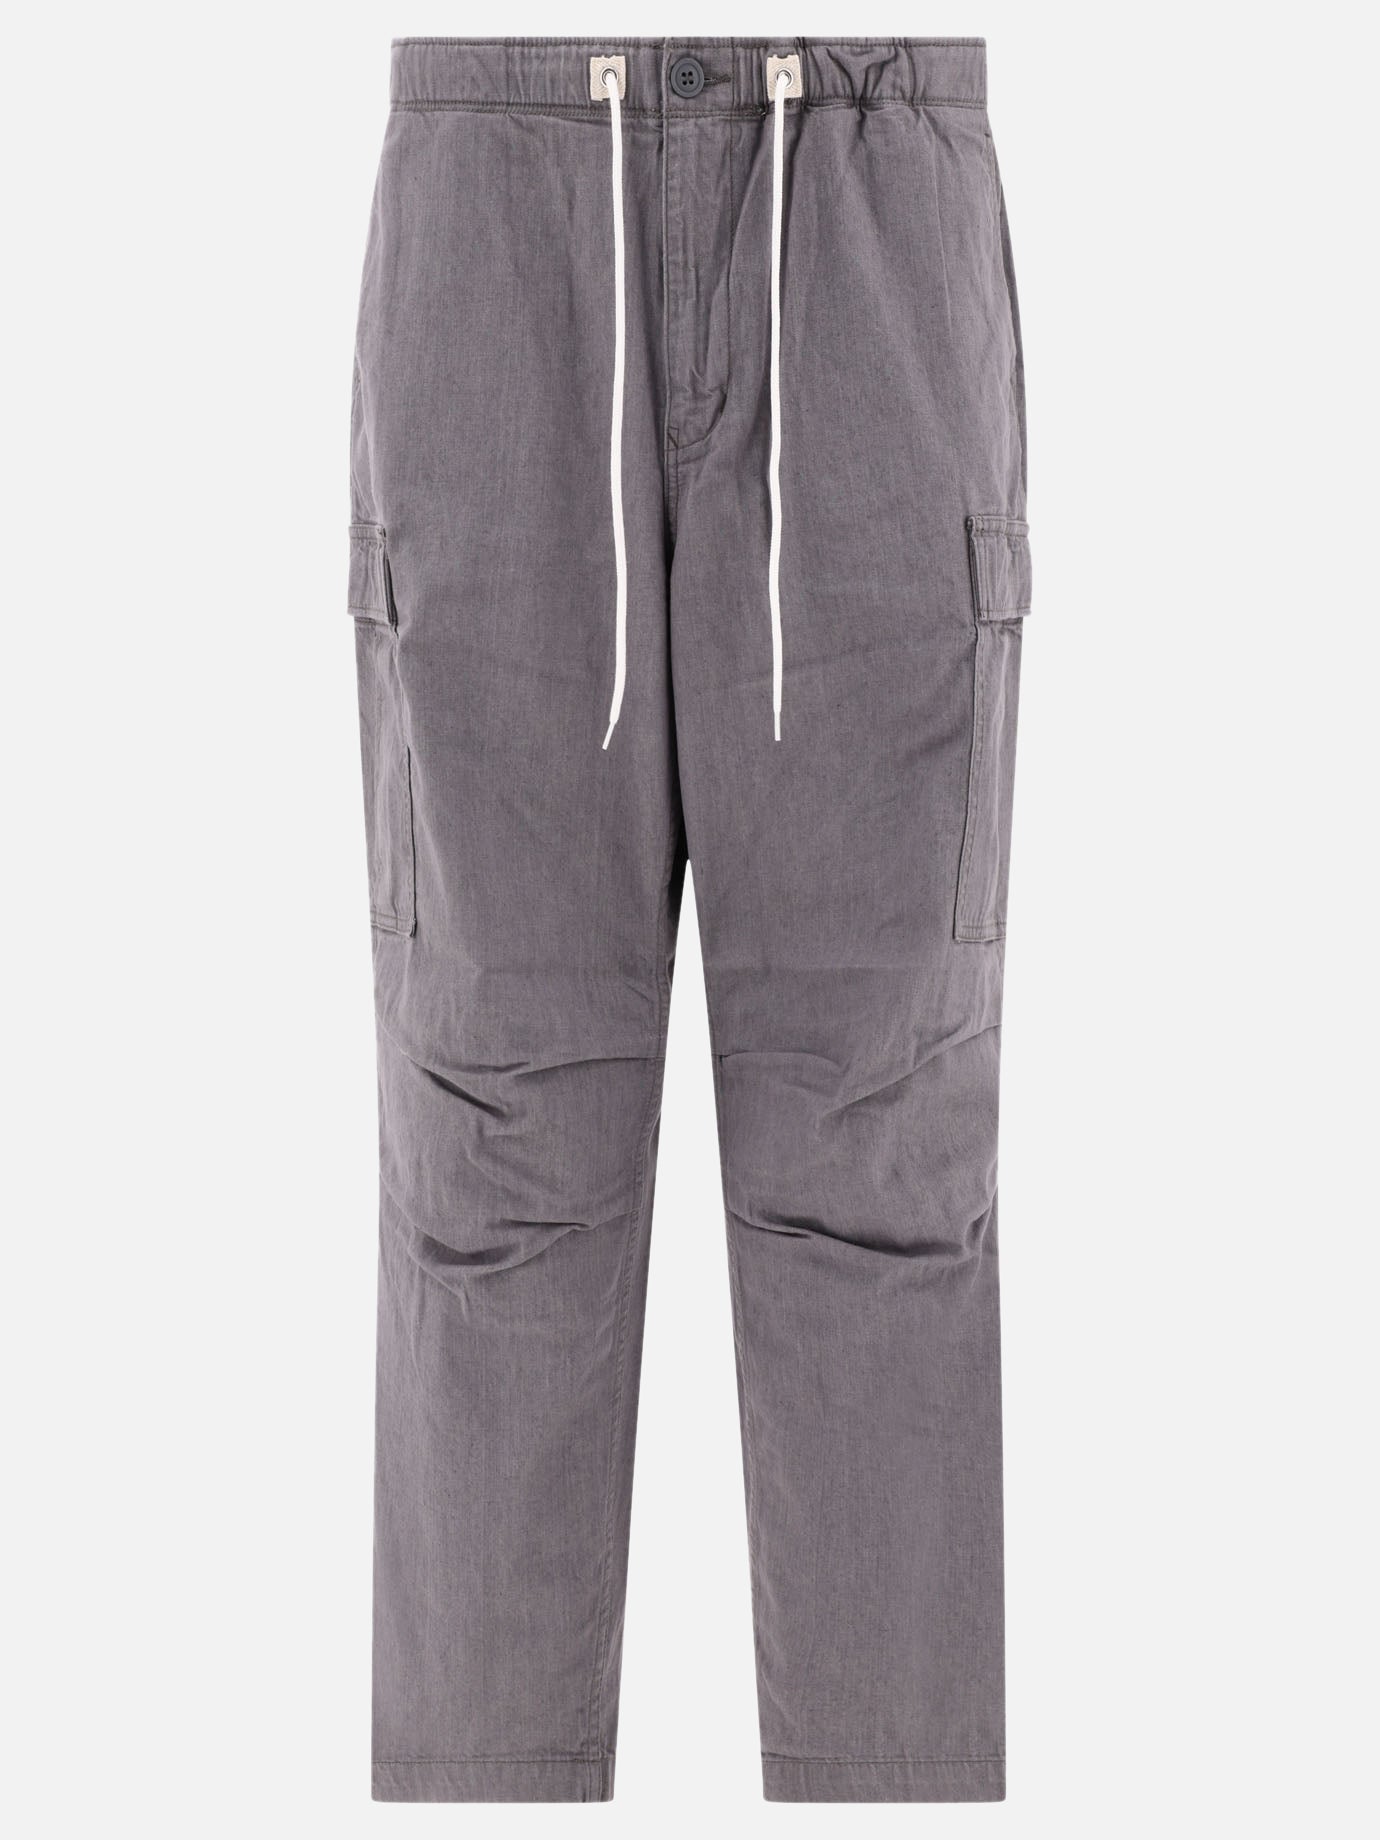 "Cargo" trousers